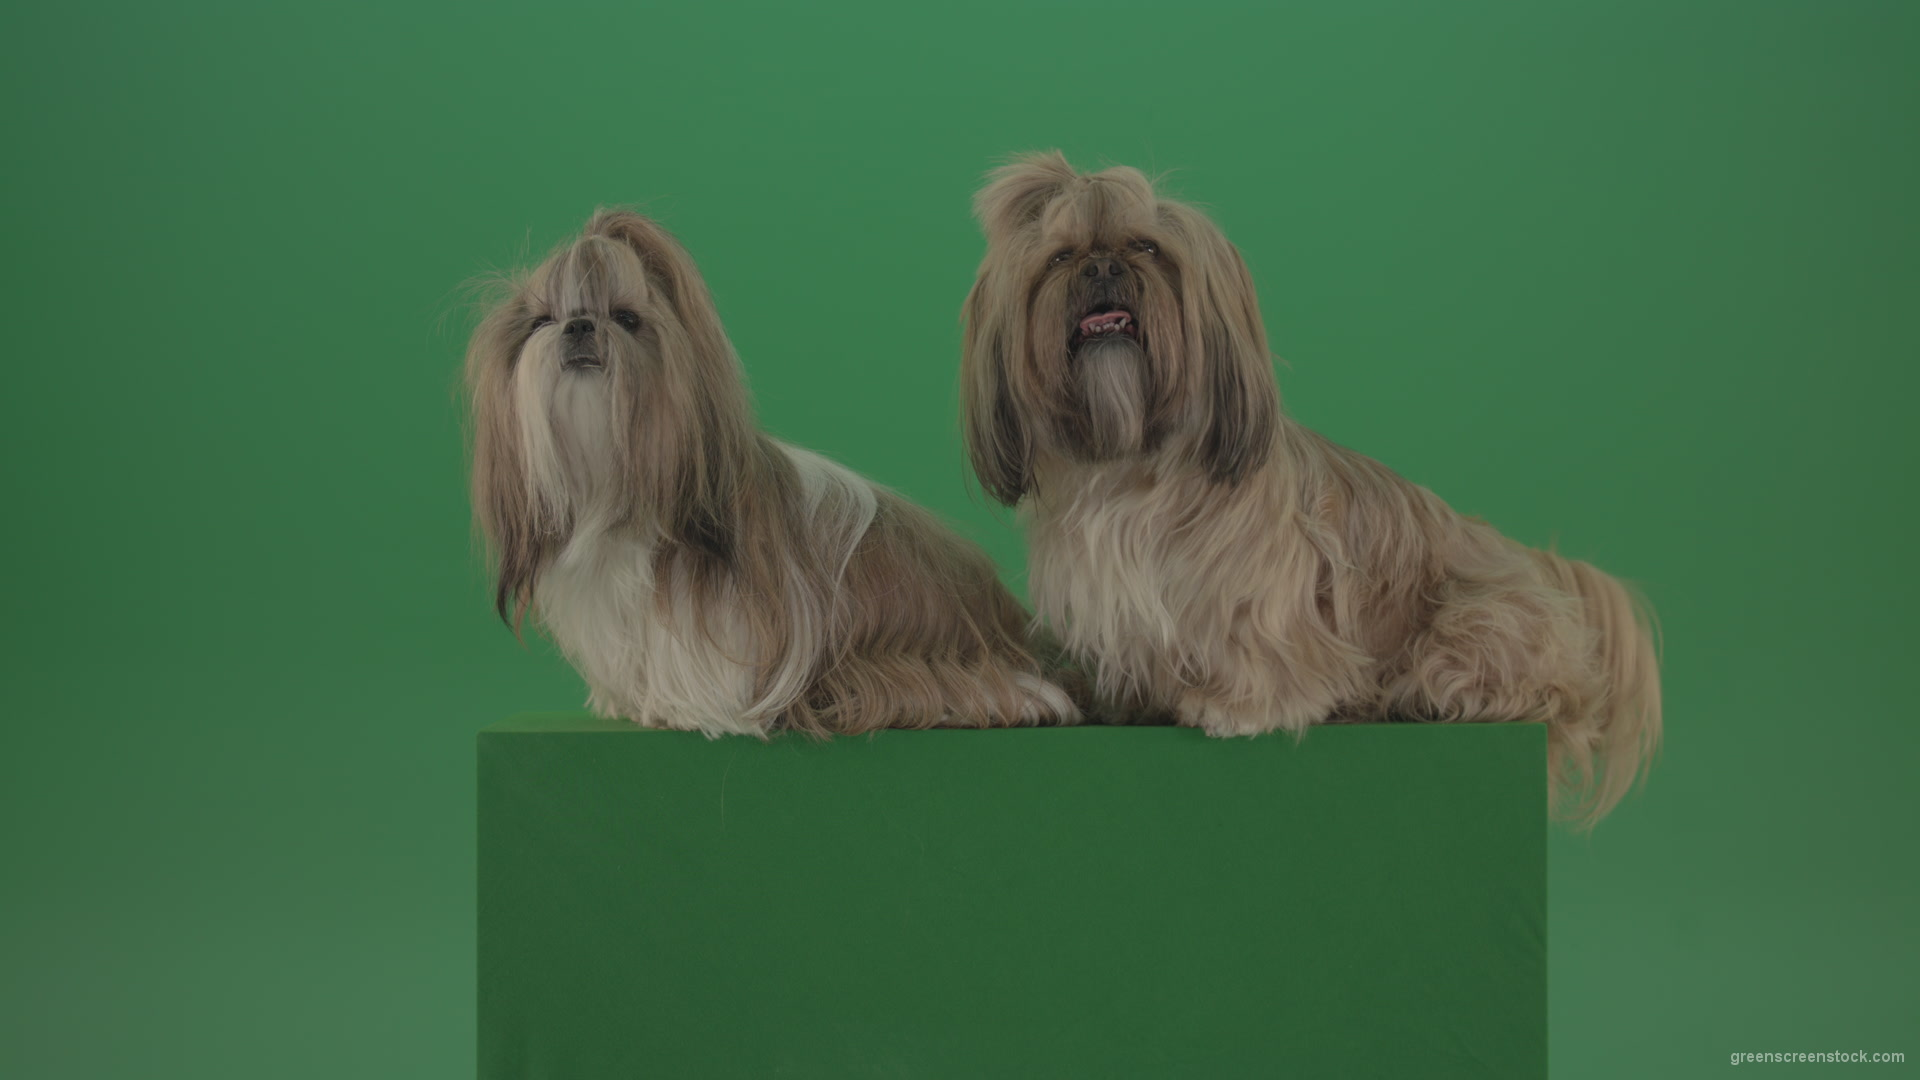 Awards-winners-Shih-tzu-fashion-luxury-expensive-dog-in-side-view-isolated-on-green-screen_004 Green Screen Stock